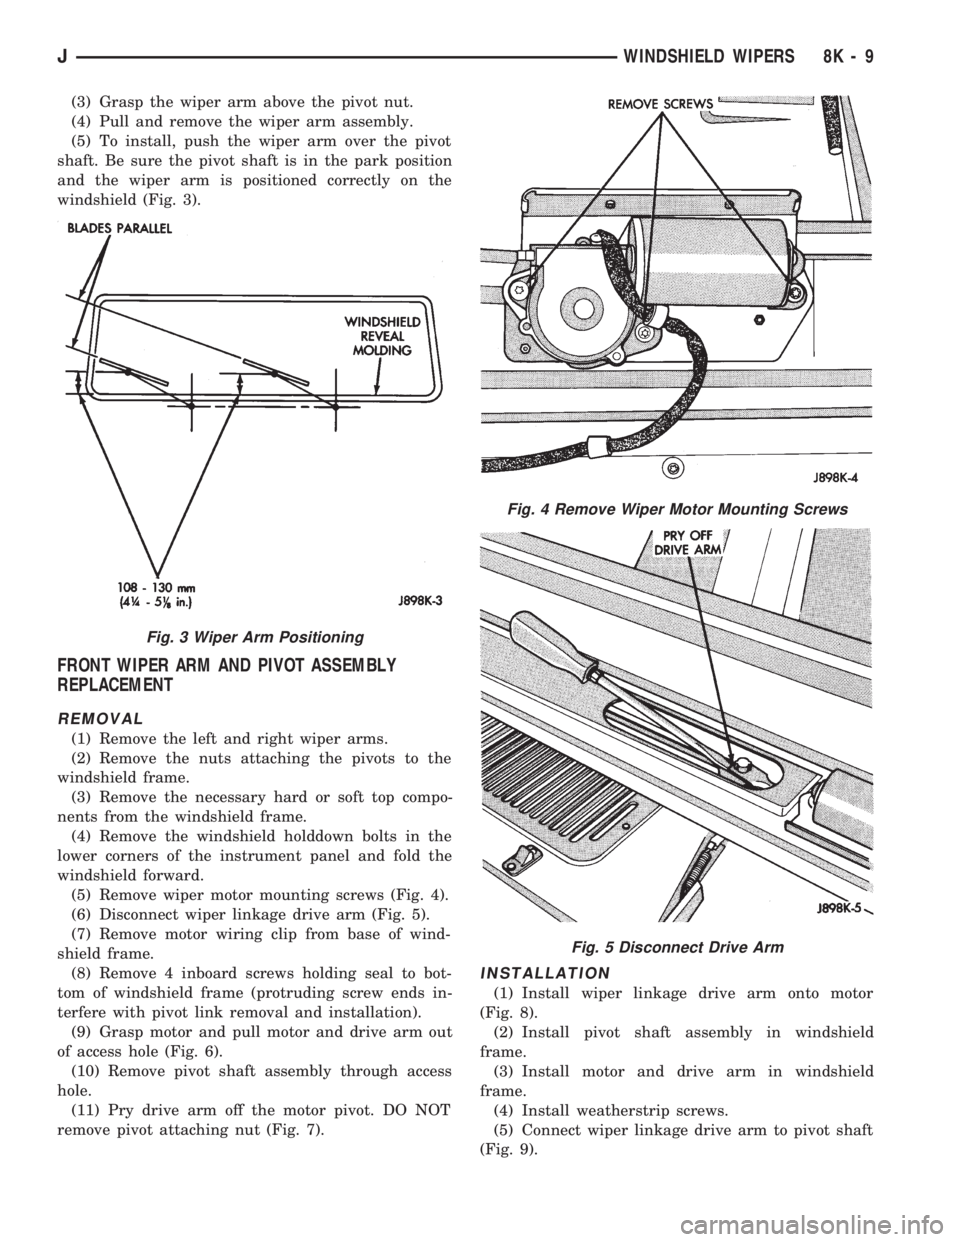 JEEP CHEROKEE 1994  Service Repair Manual (3) Grasp the wiper arm above the pivot nut.
(4) Pull and remove the wiper arm assembly.
(5) To install, push the wiper arm over the pivot
shaft. Be sure the pivot shaft is in the park position
and th